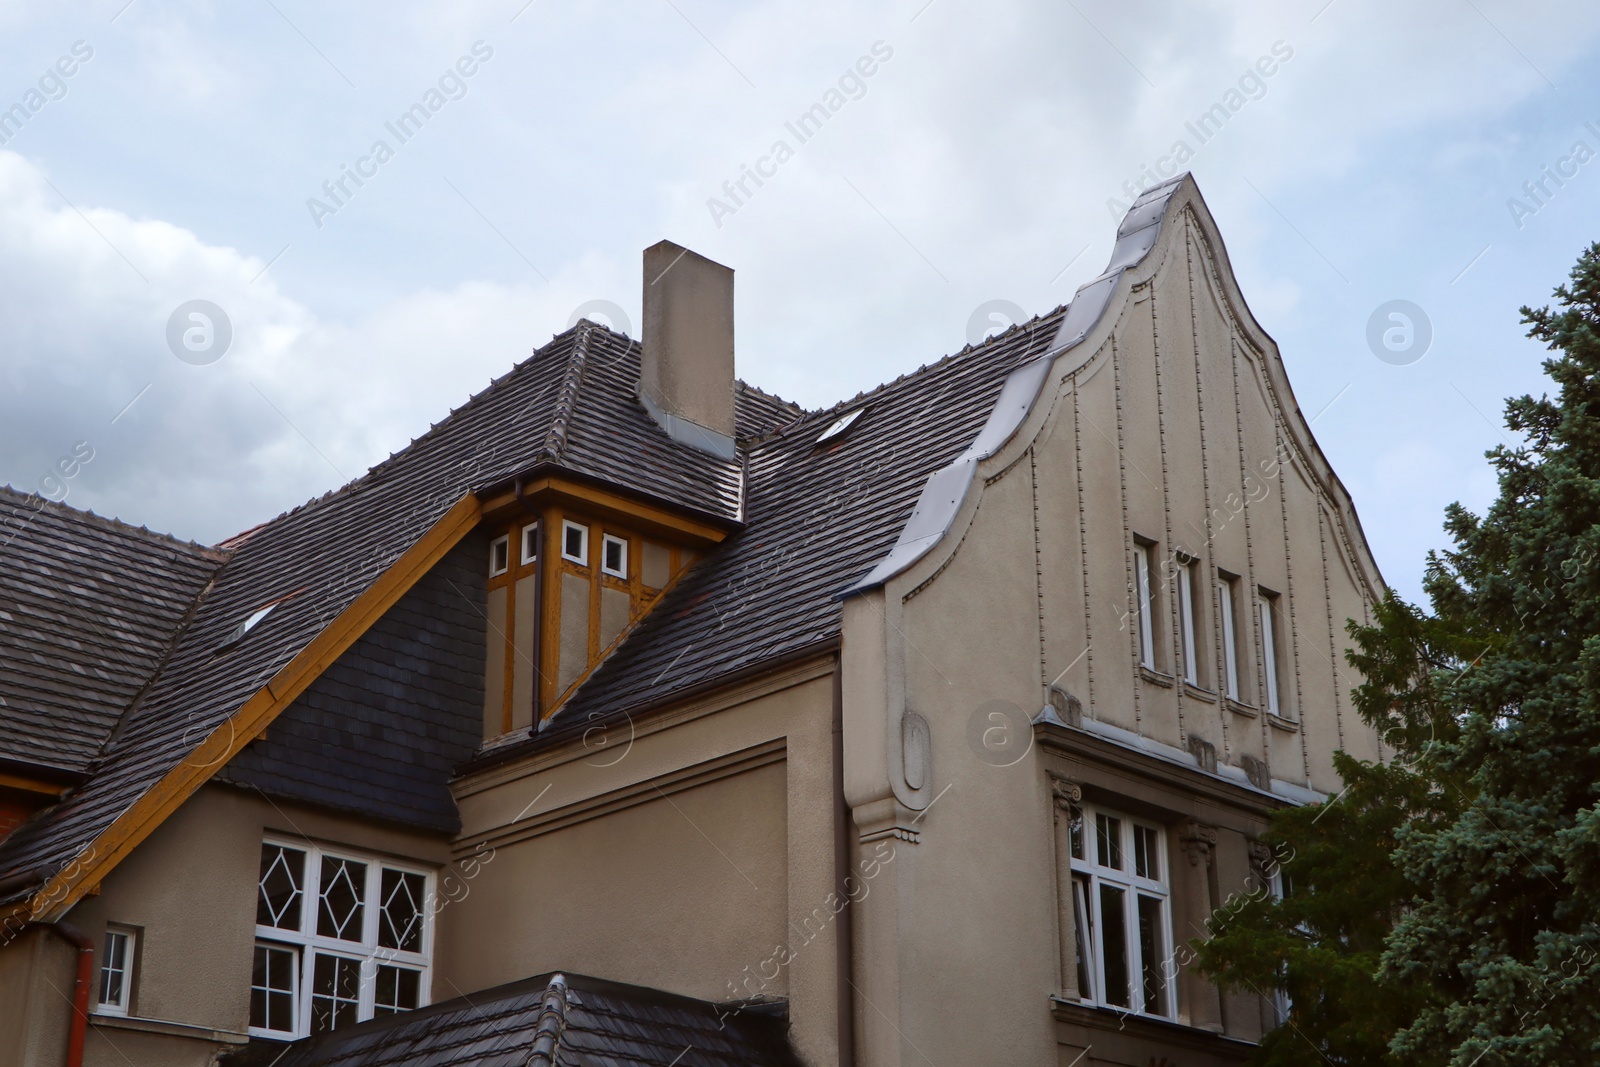 Photo of Beautiful house with black roof against blue sky